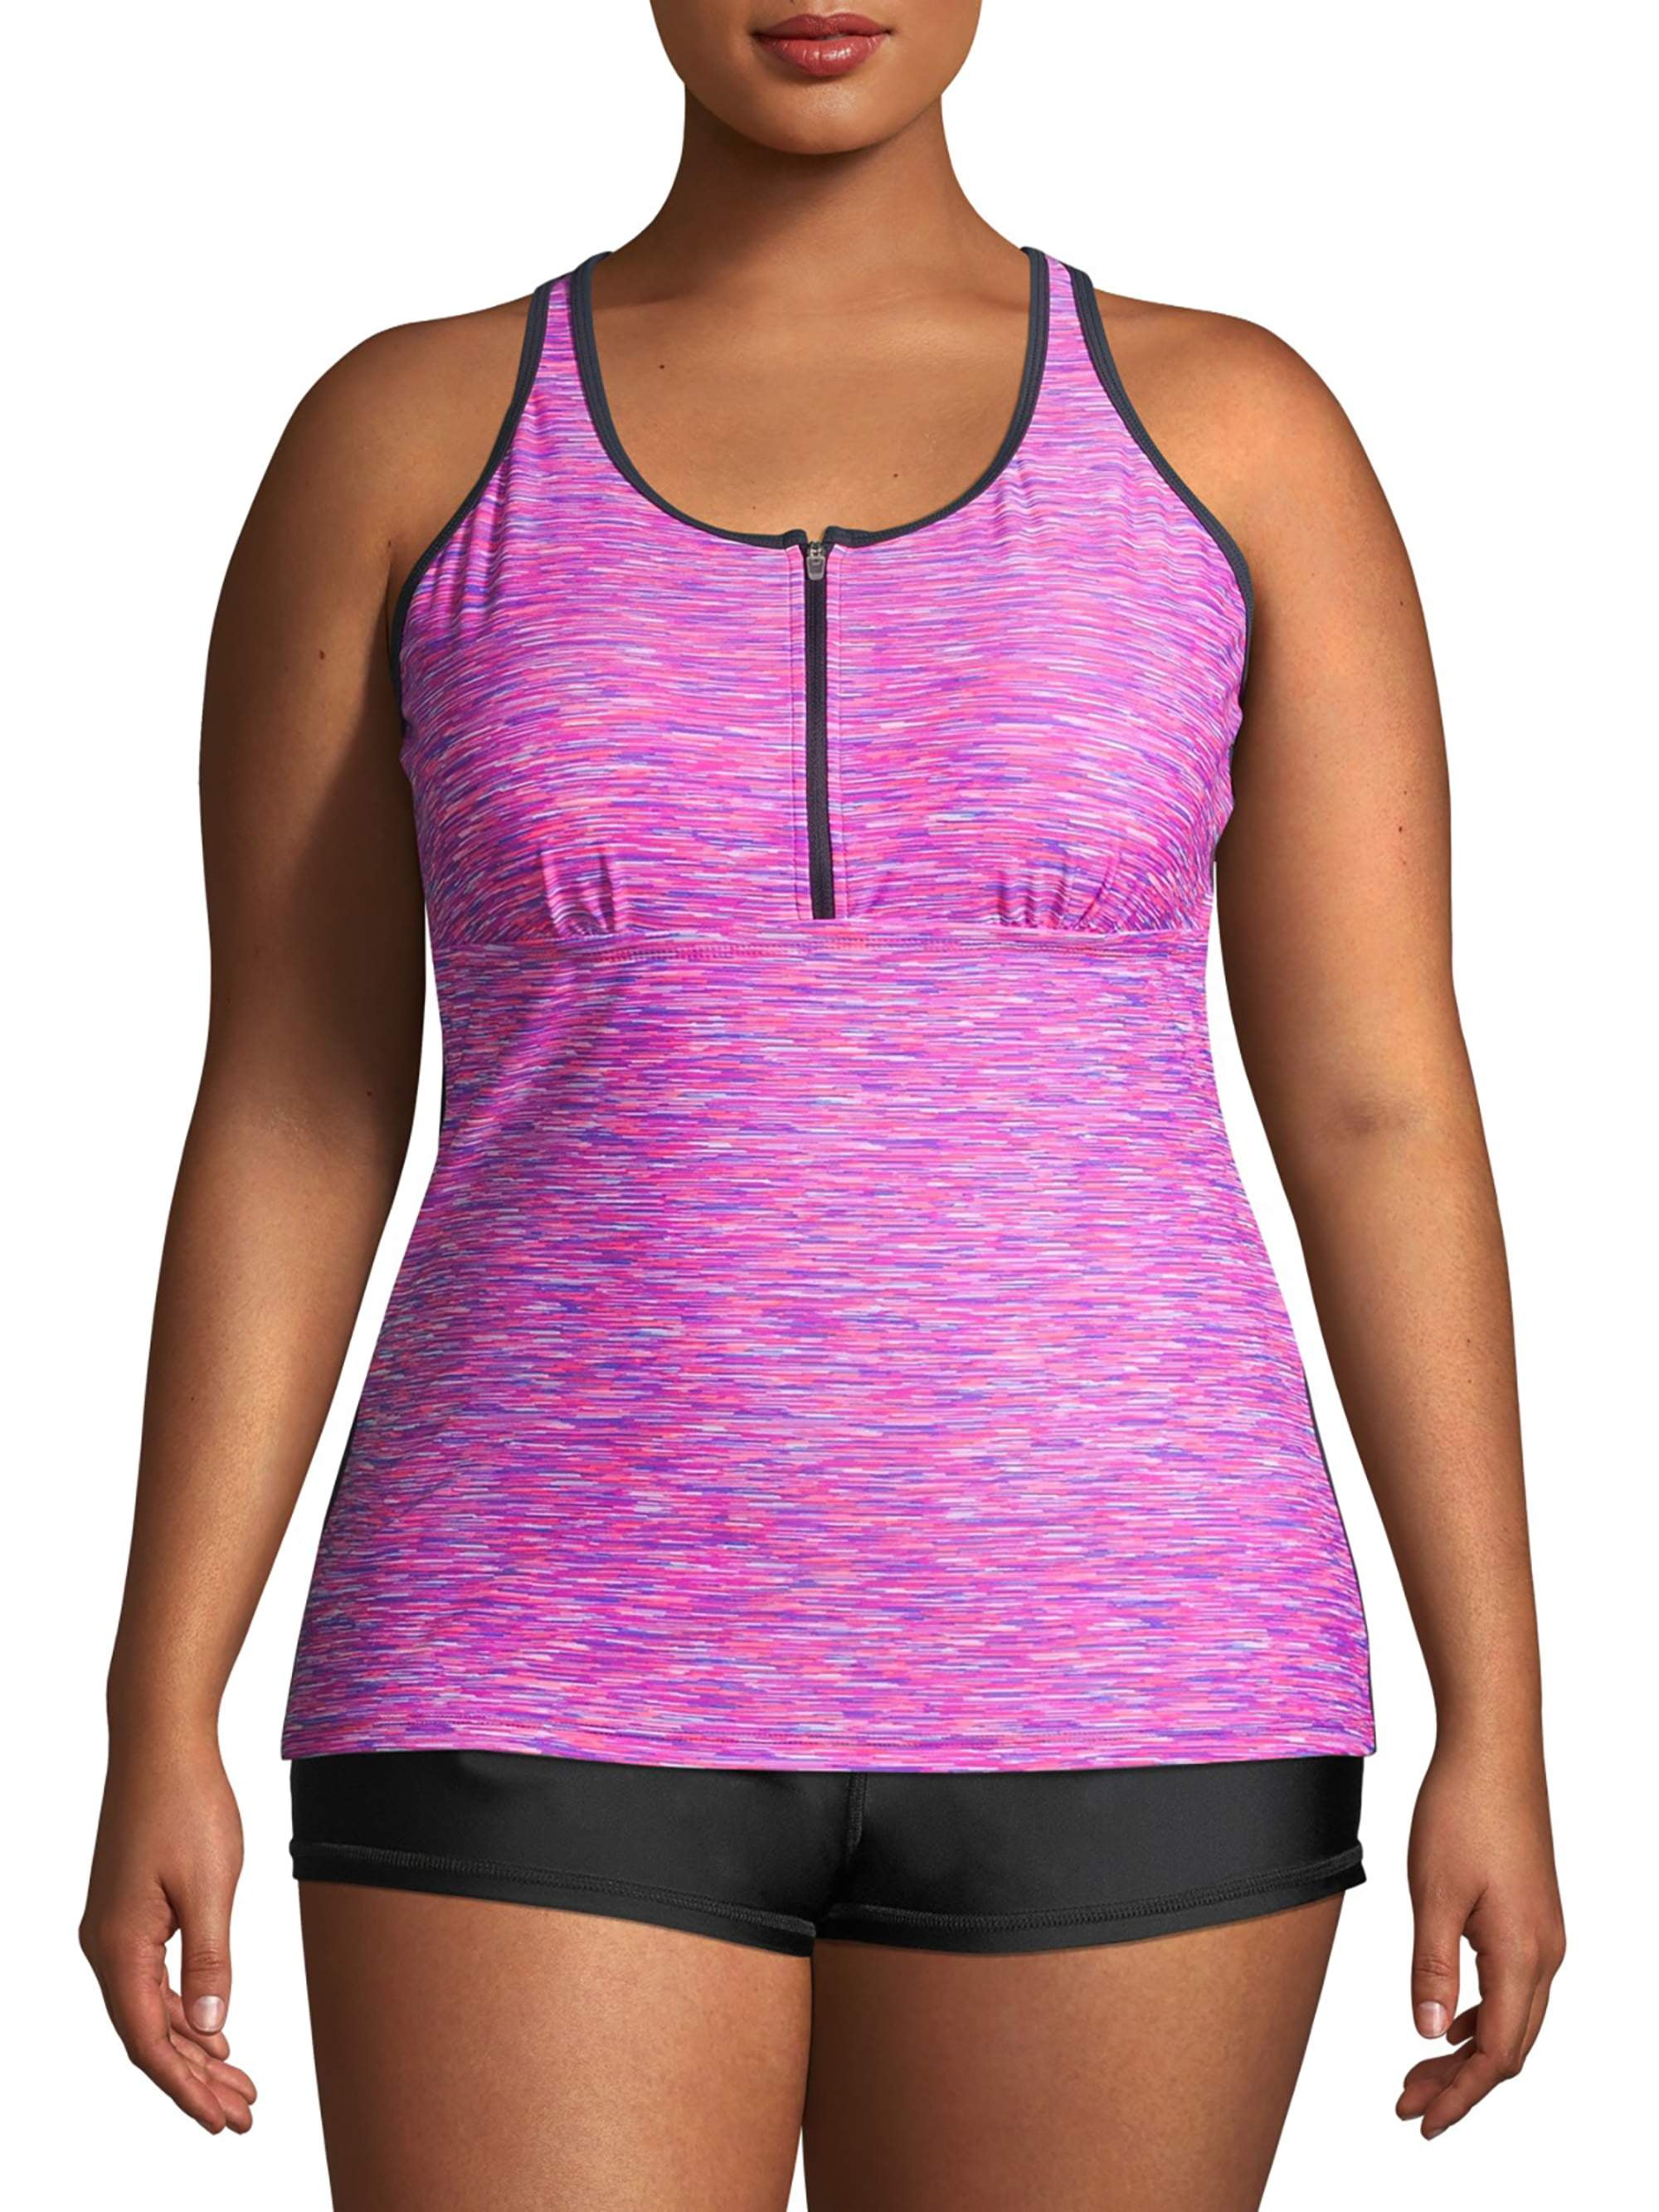 Free Tech Womens Plus Size Athletic Zip Front Racer Back Tankini Swimsuit Top